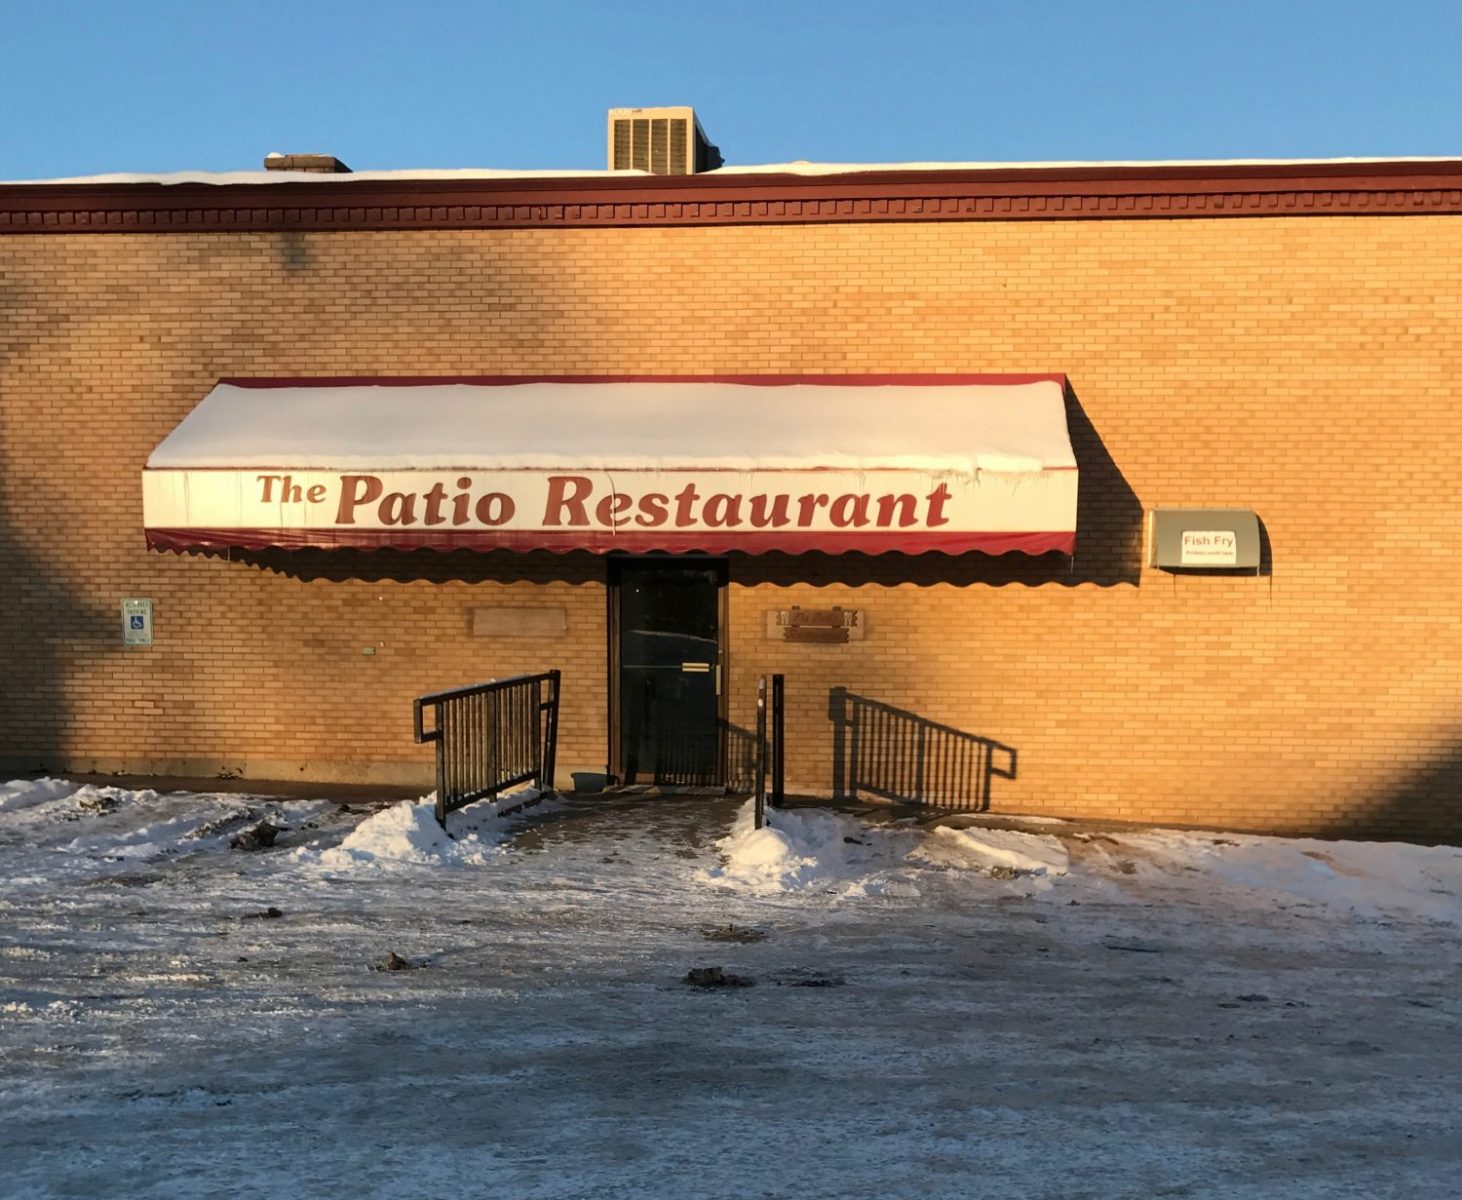 The Patio Restaurant will close Dec. 31, 2016. Building owners Jerry and Connie Miller hope to lease the space to new proprietors.